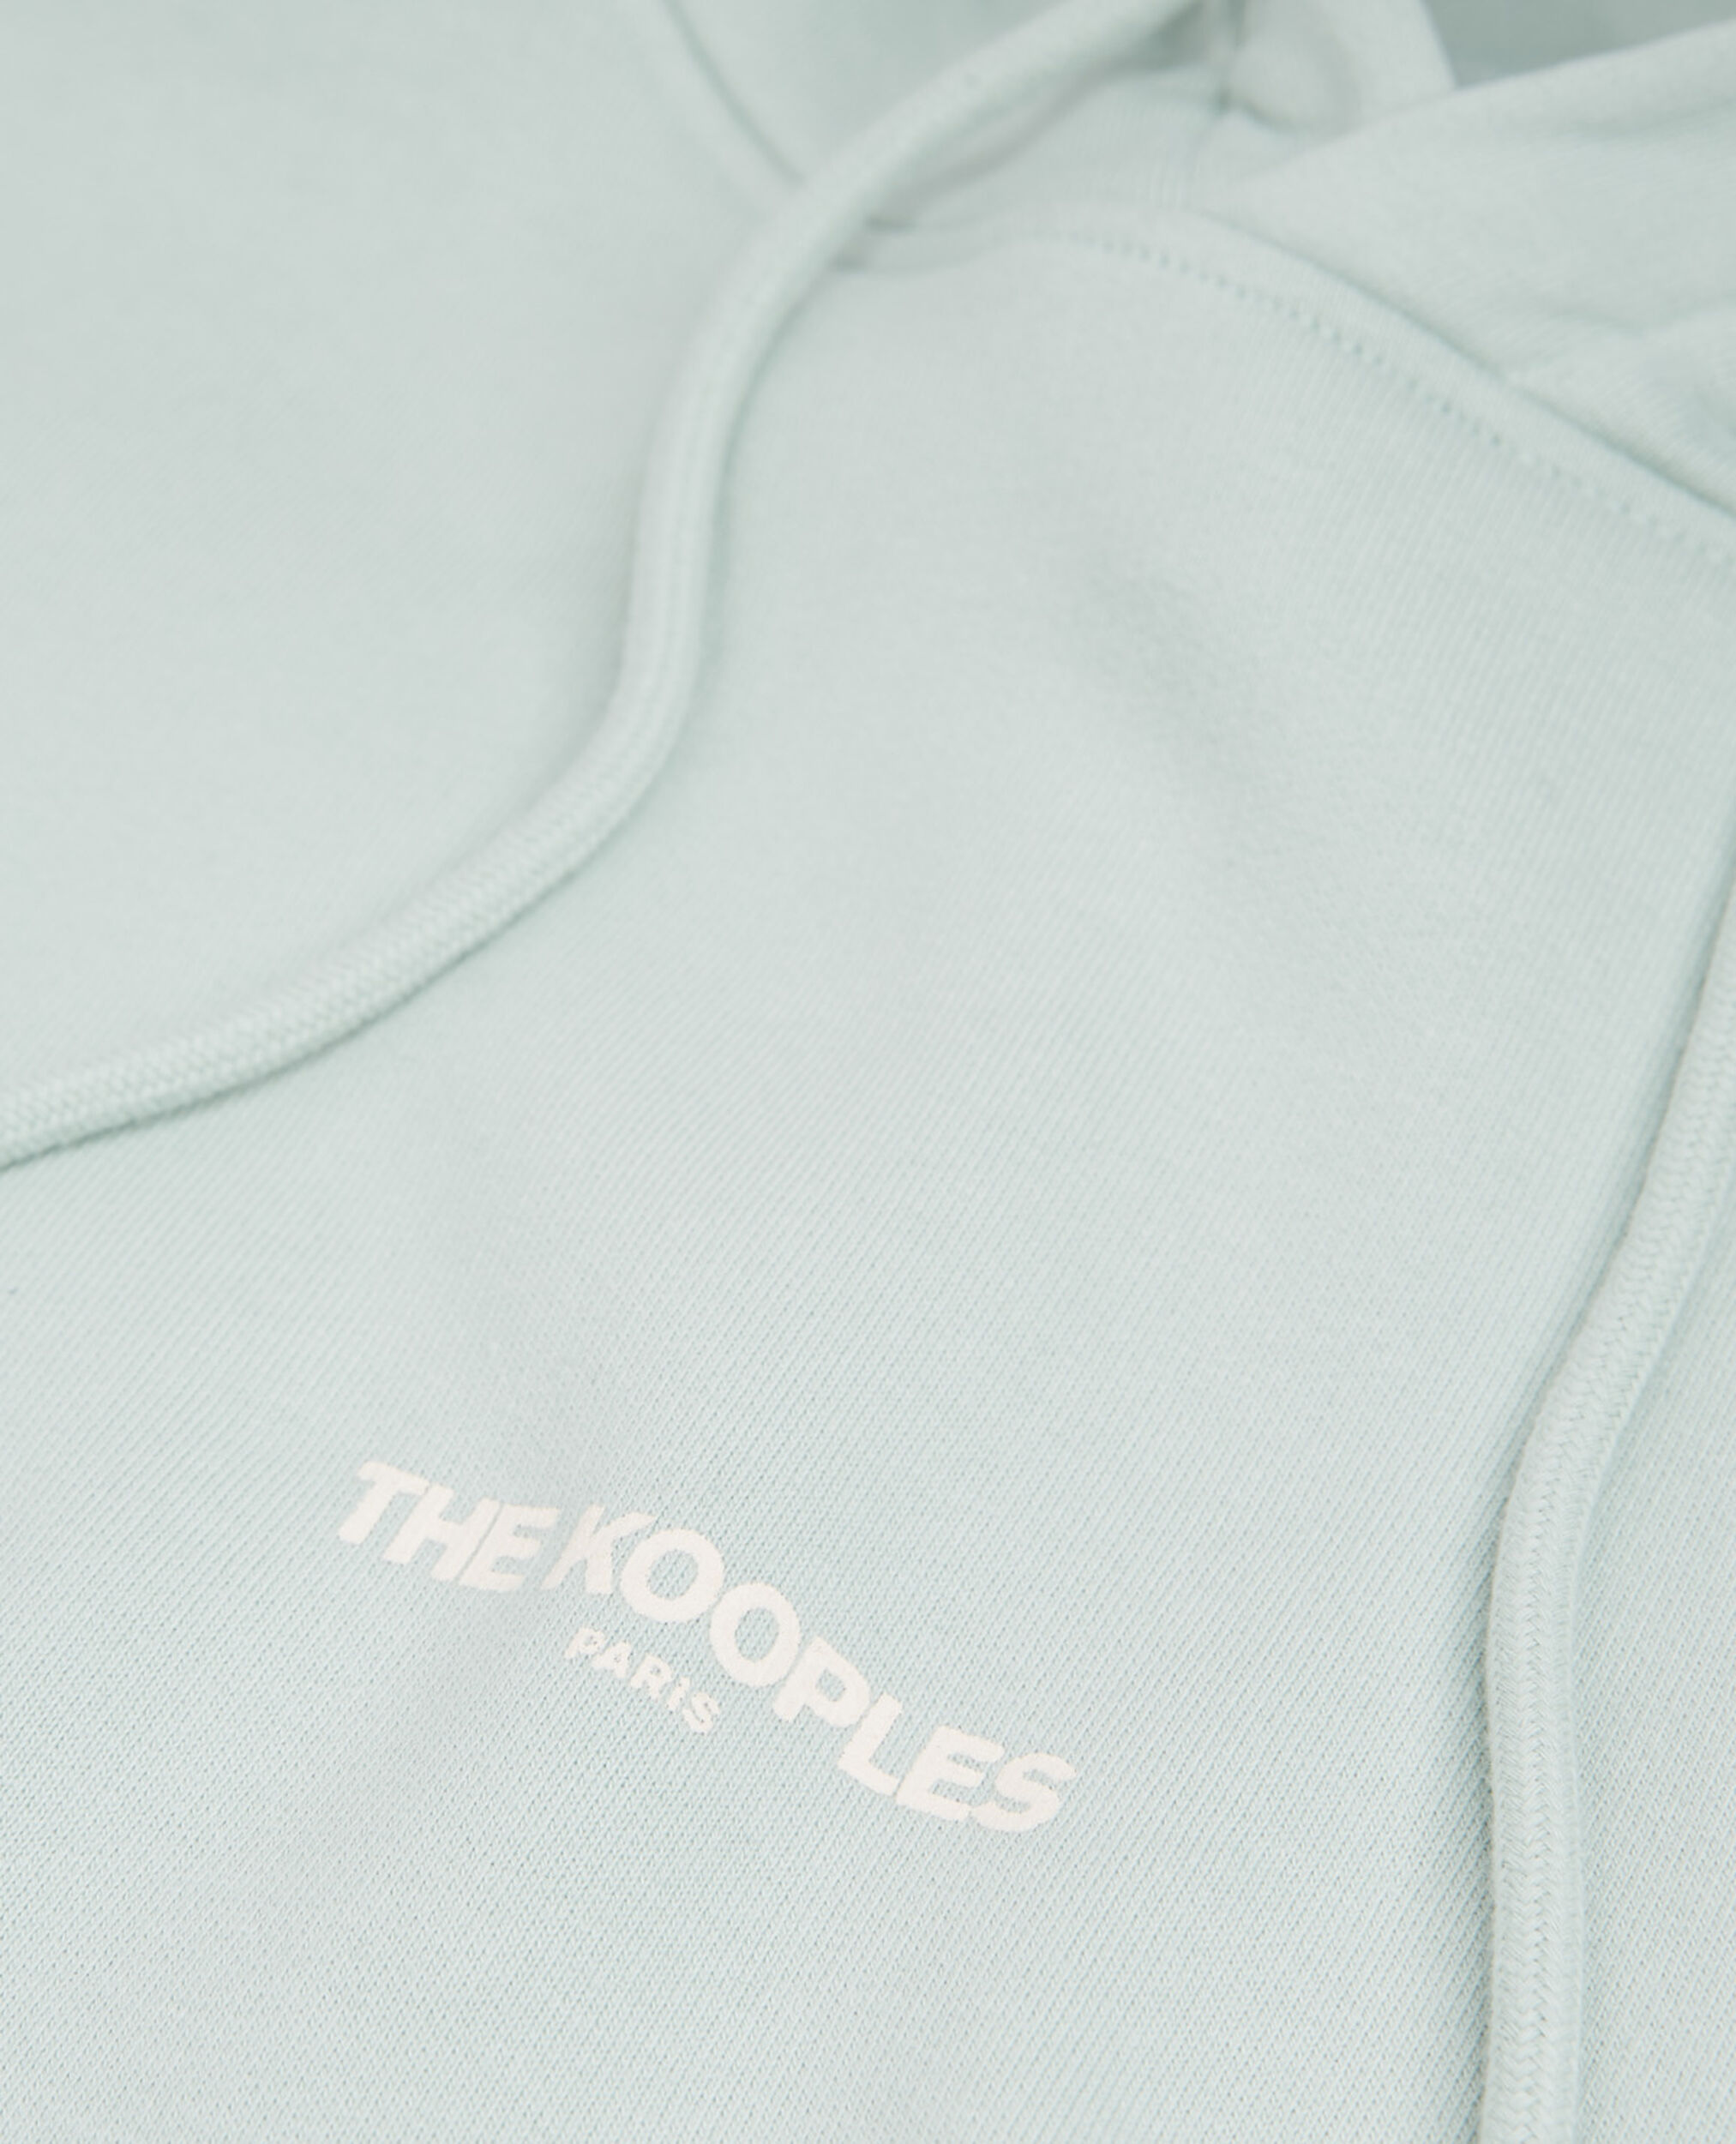 Sea green hoodie with logo on the chest, GRIS BLEU, hi-res image number null